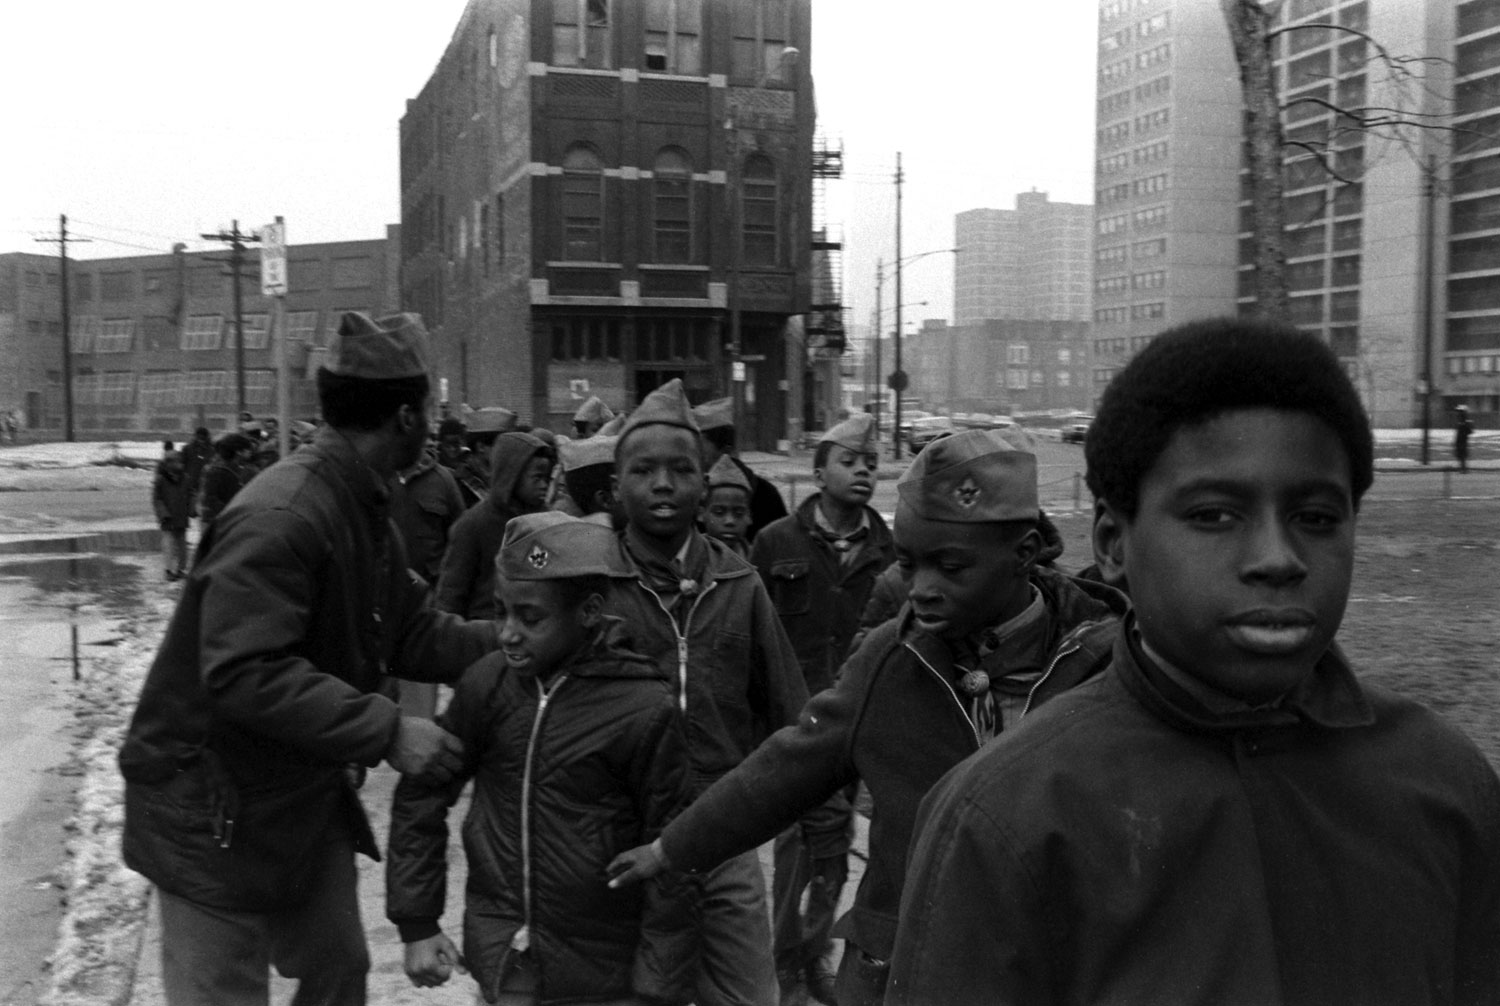 Chicago Boy Scouts, 1971